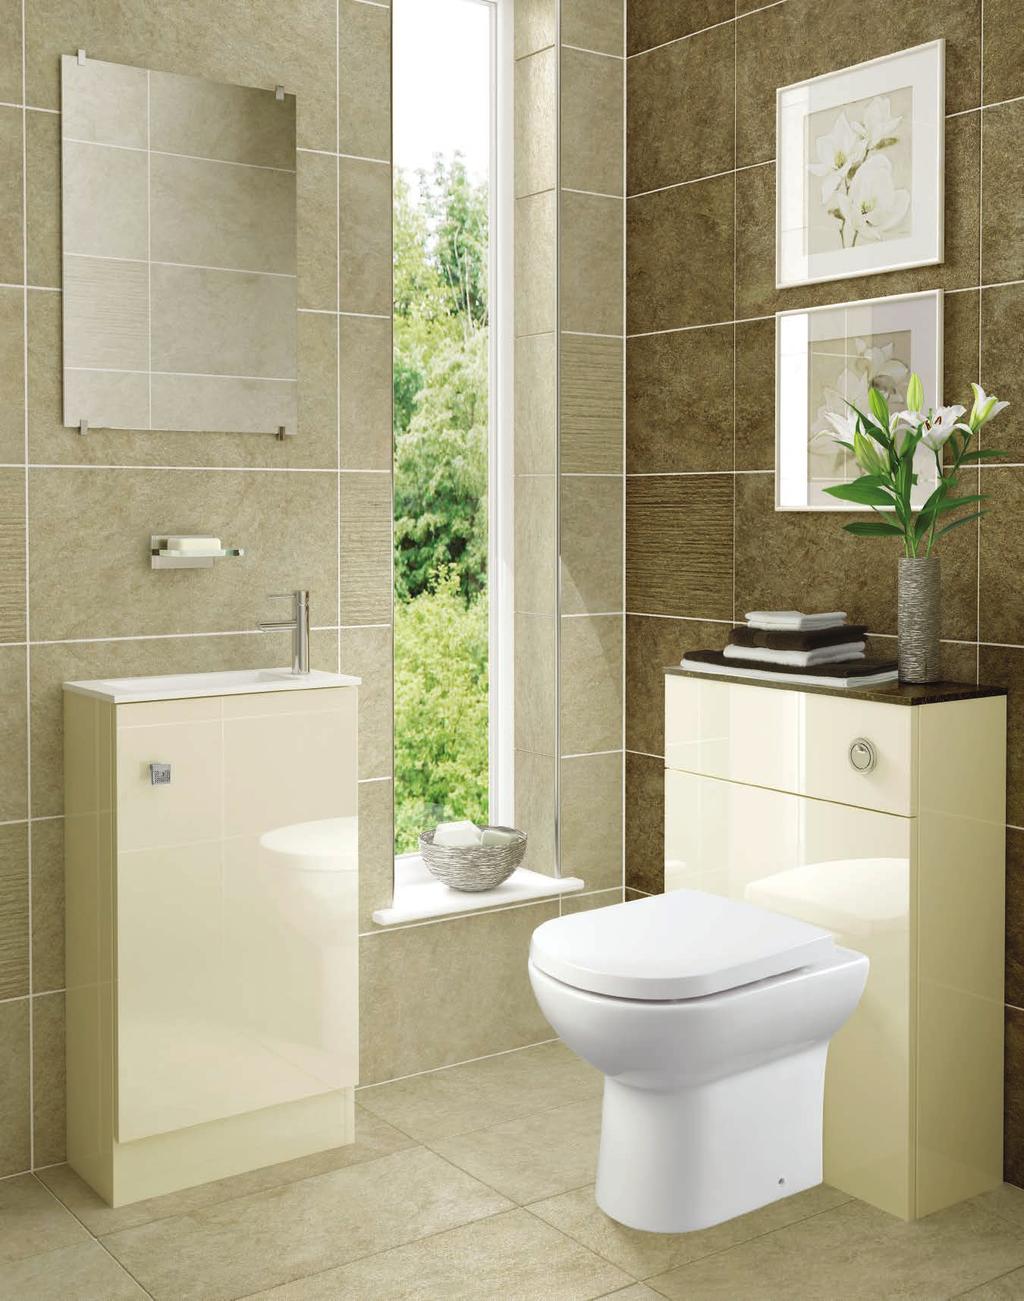 image gloss oyster A 450mm wide floor mounted Mini Cloakroom unit is shown in